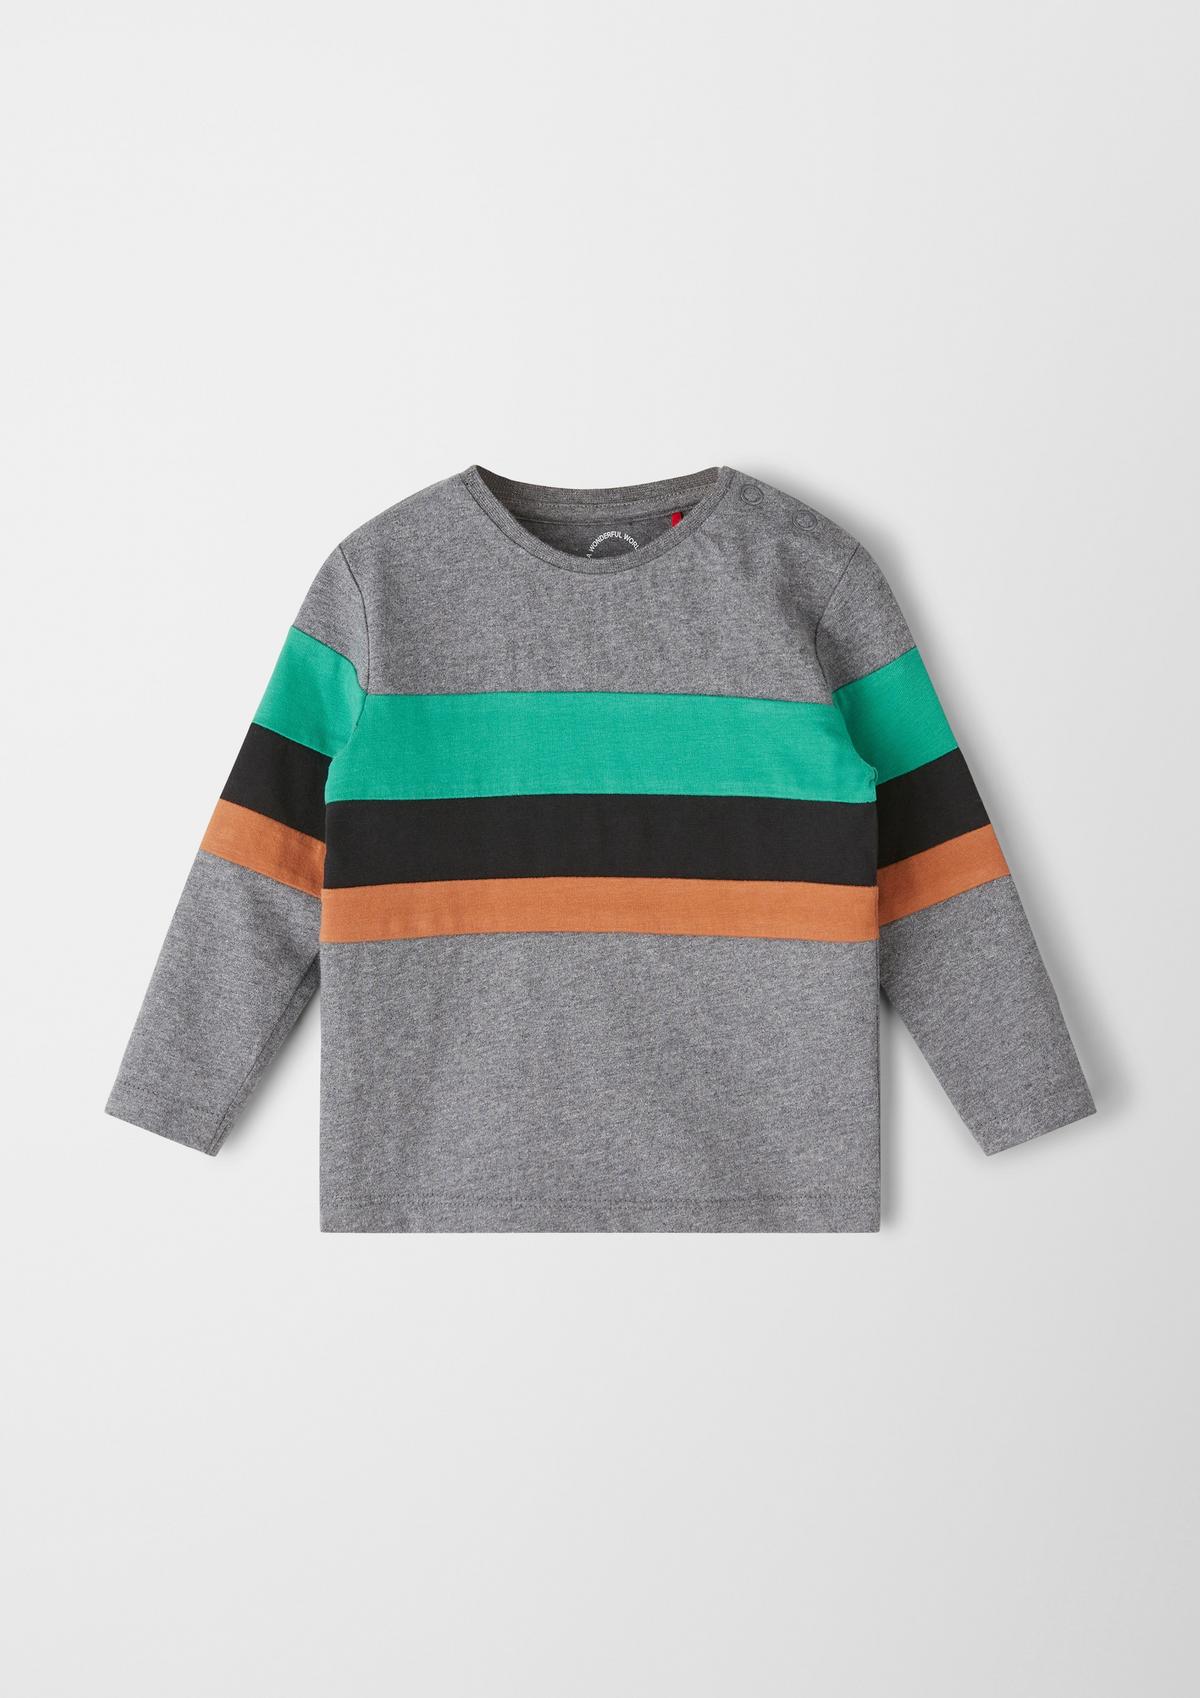 s.Oliver Long sleeve cotton top